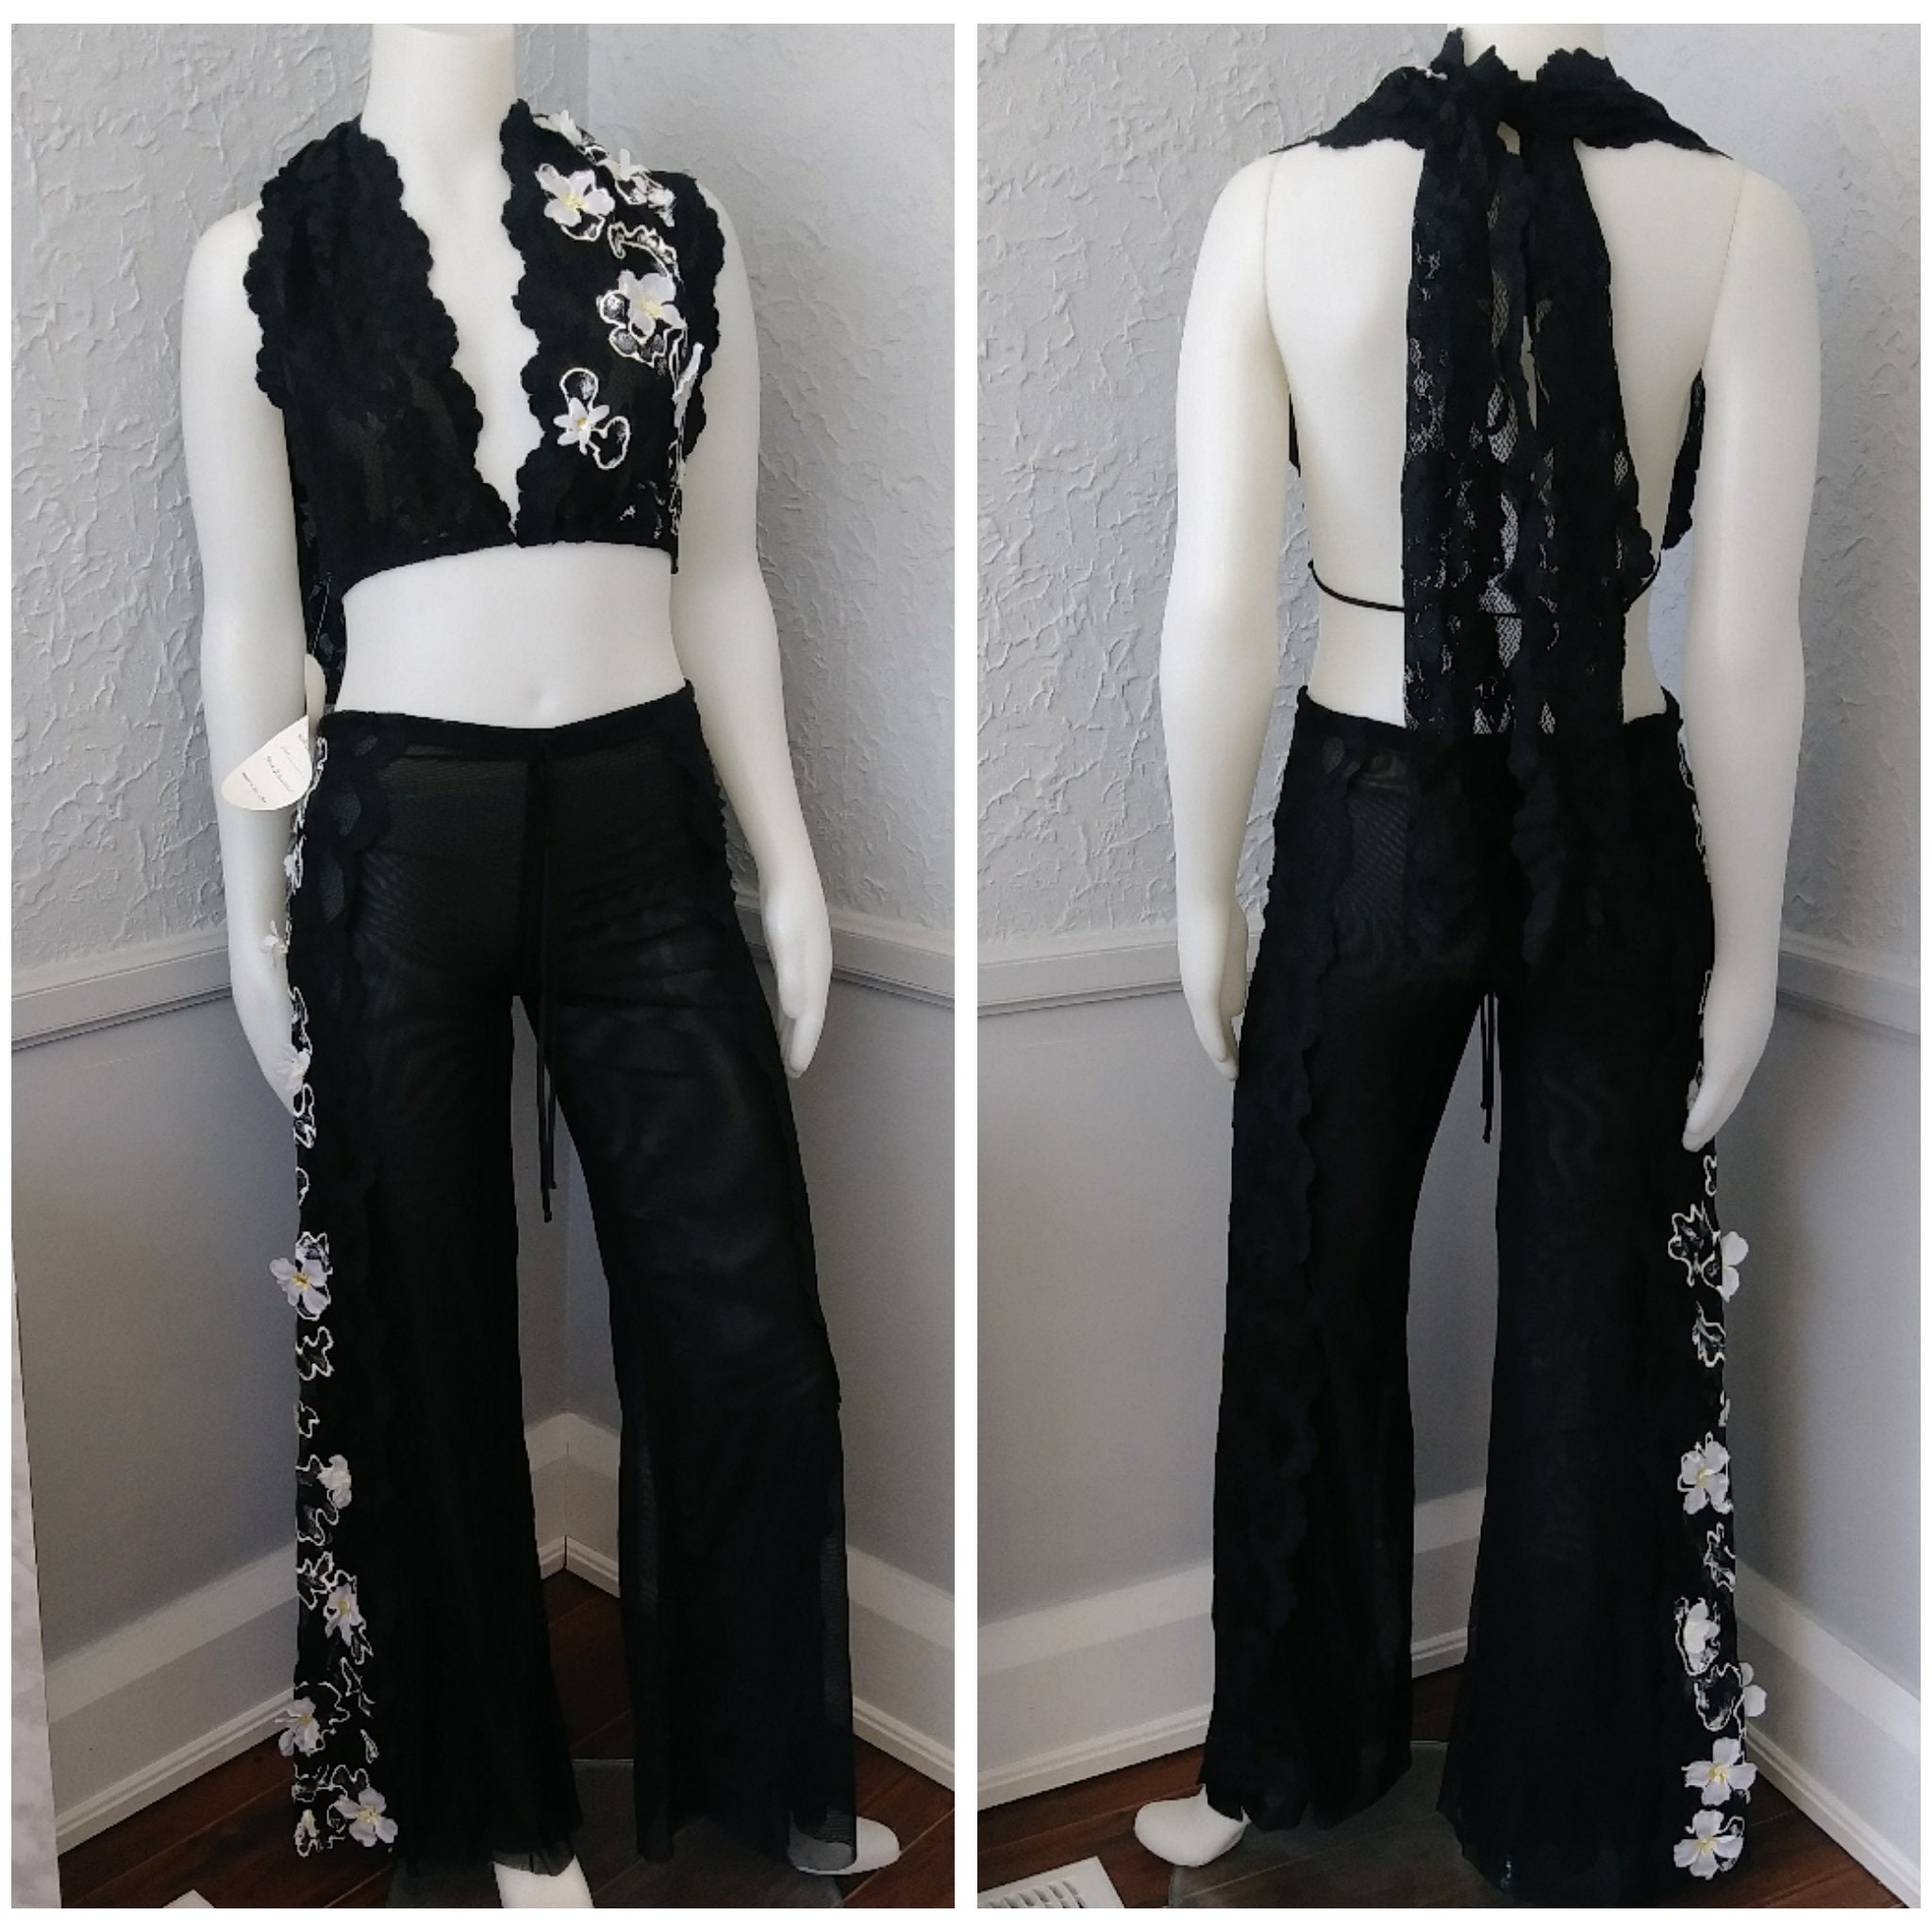 Black Lace and Sheer Top and Pants Set Beach, Summer Casual Unique Outfit 